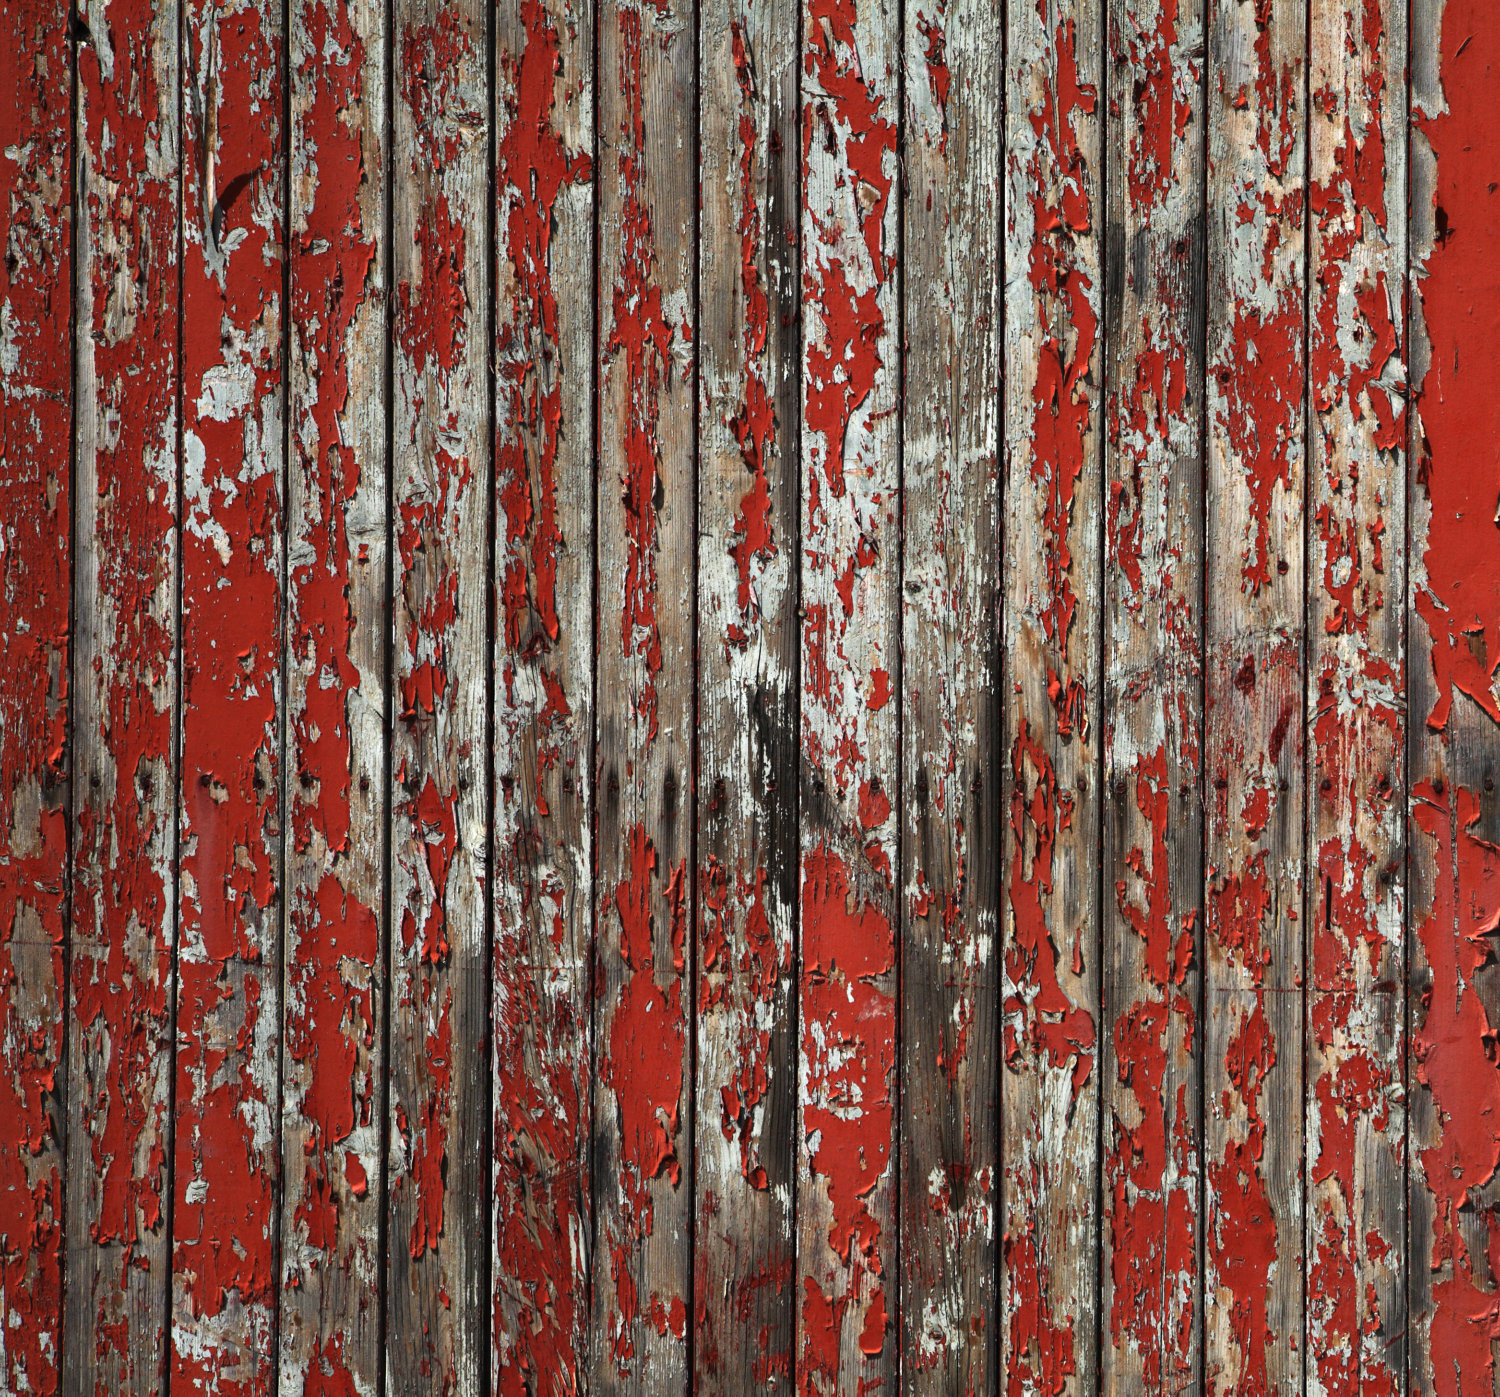 Rustic Red Barn Wood Background